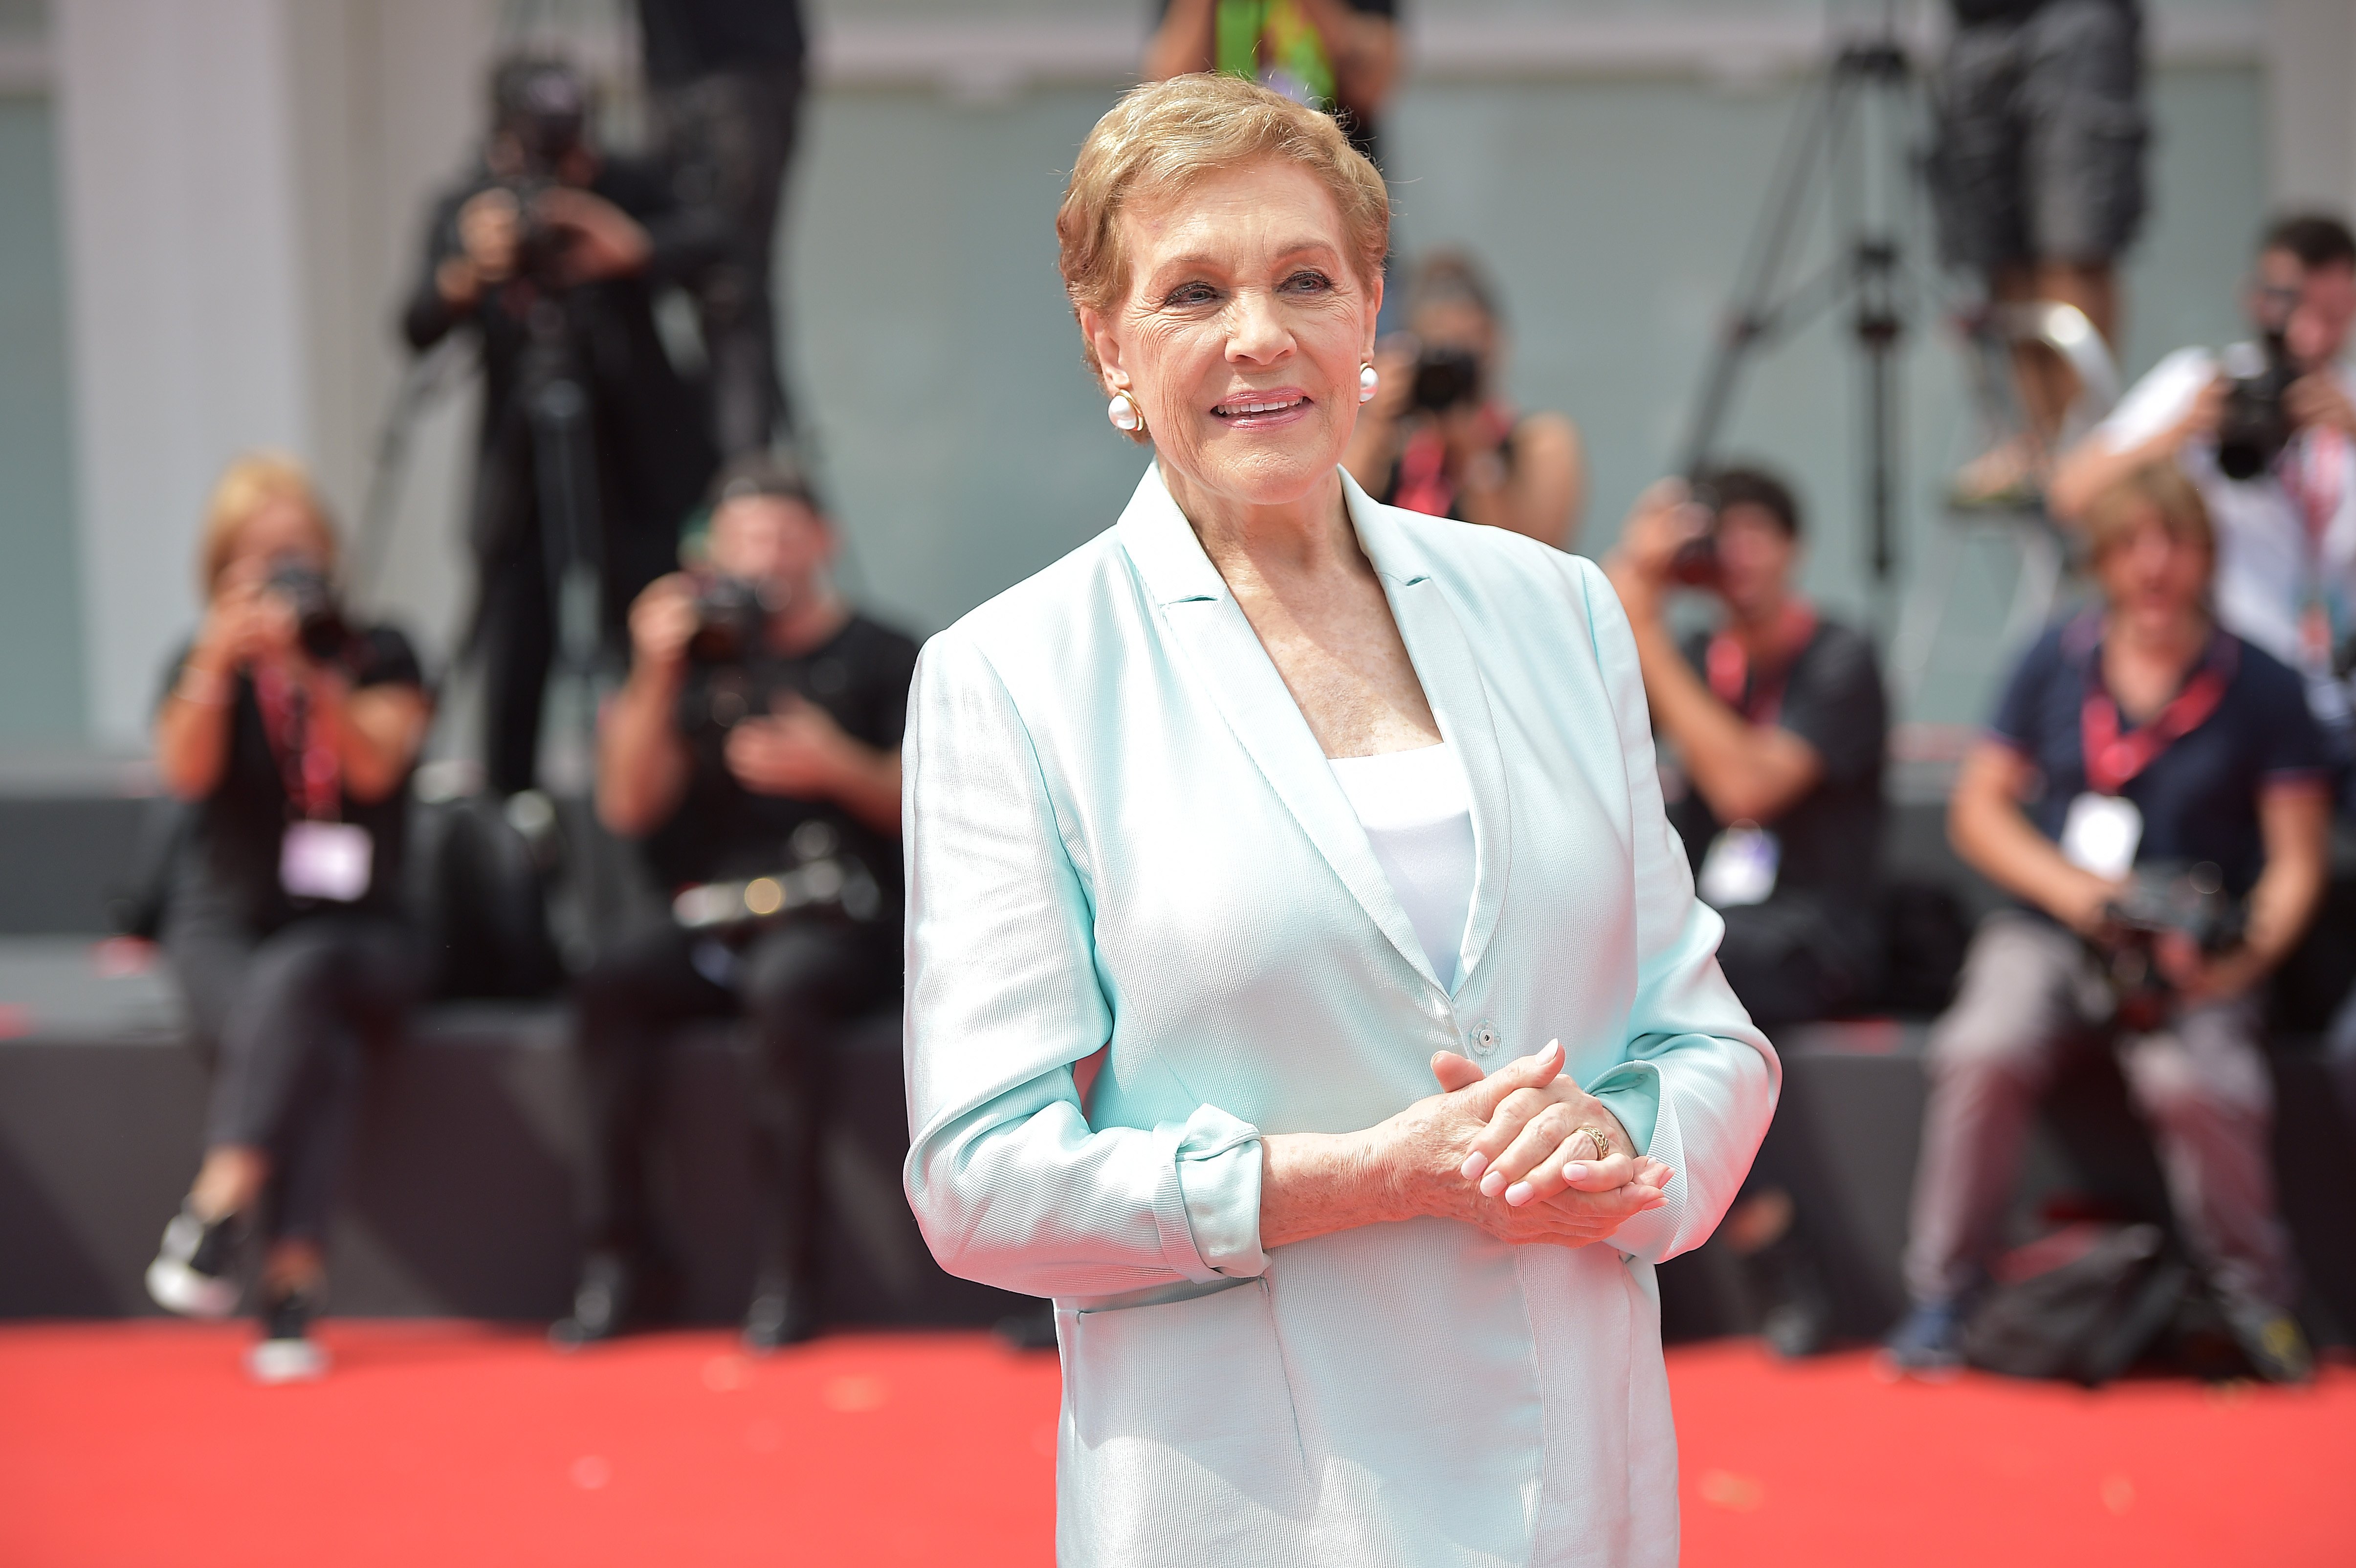 Julie Andrews attends the 76th Venice Film Festival in Italy on September 2, 2019 | Photo: Getty Images